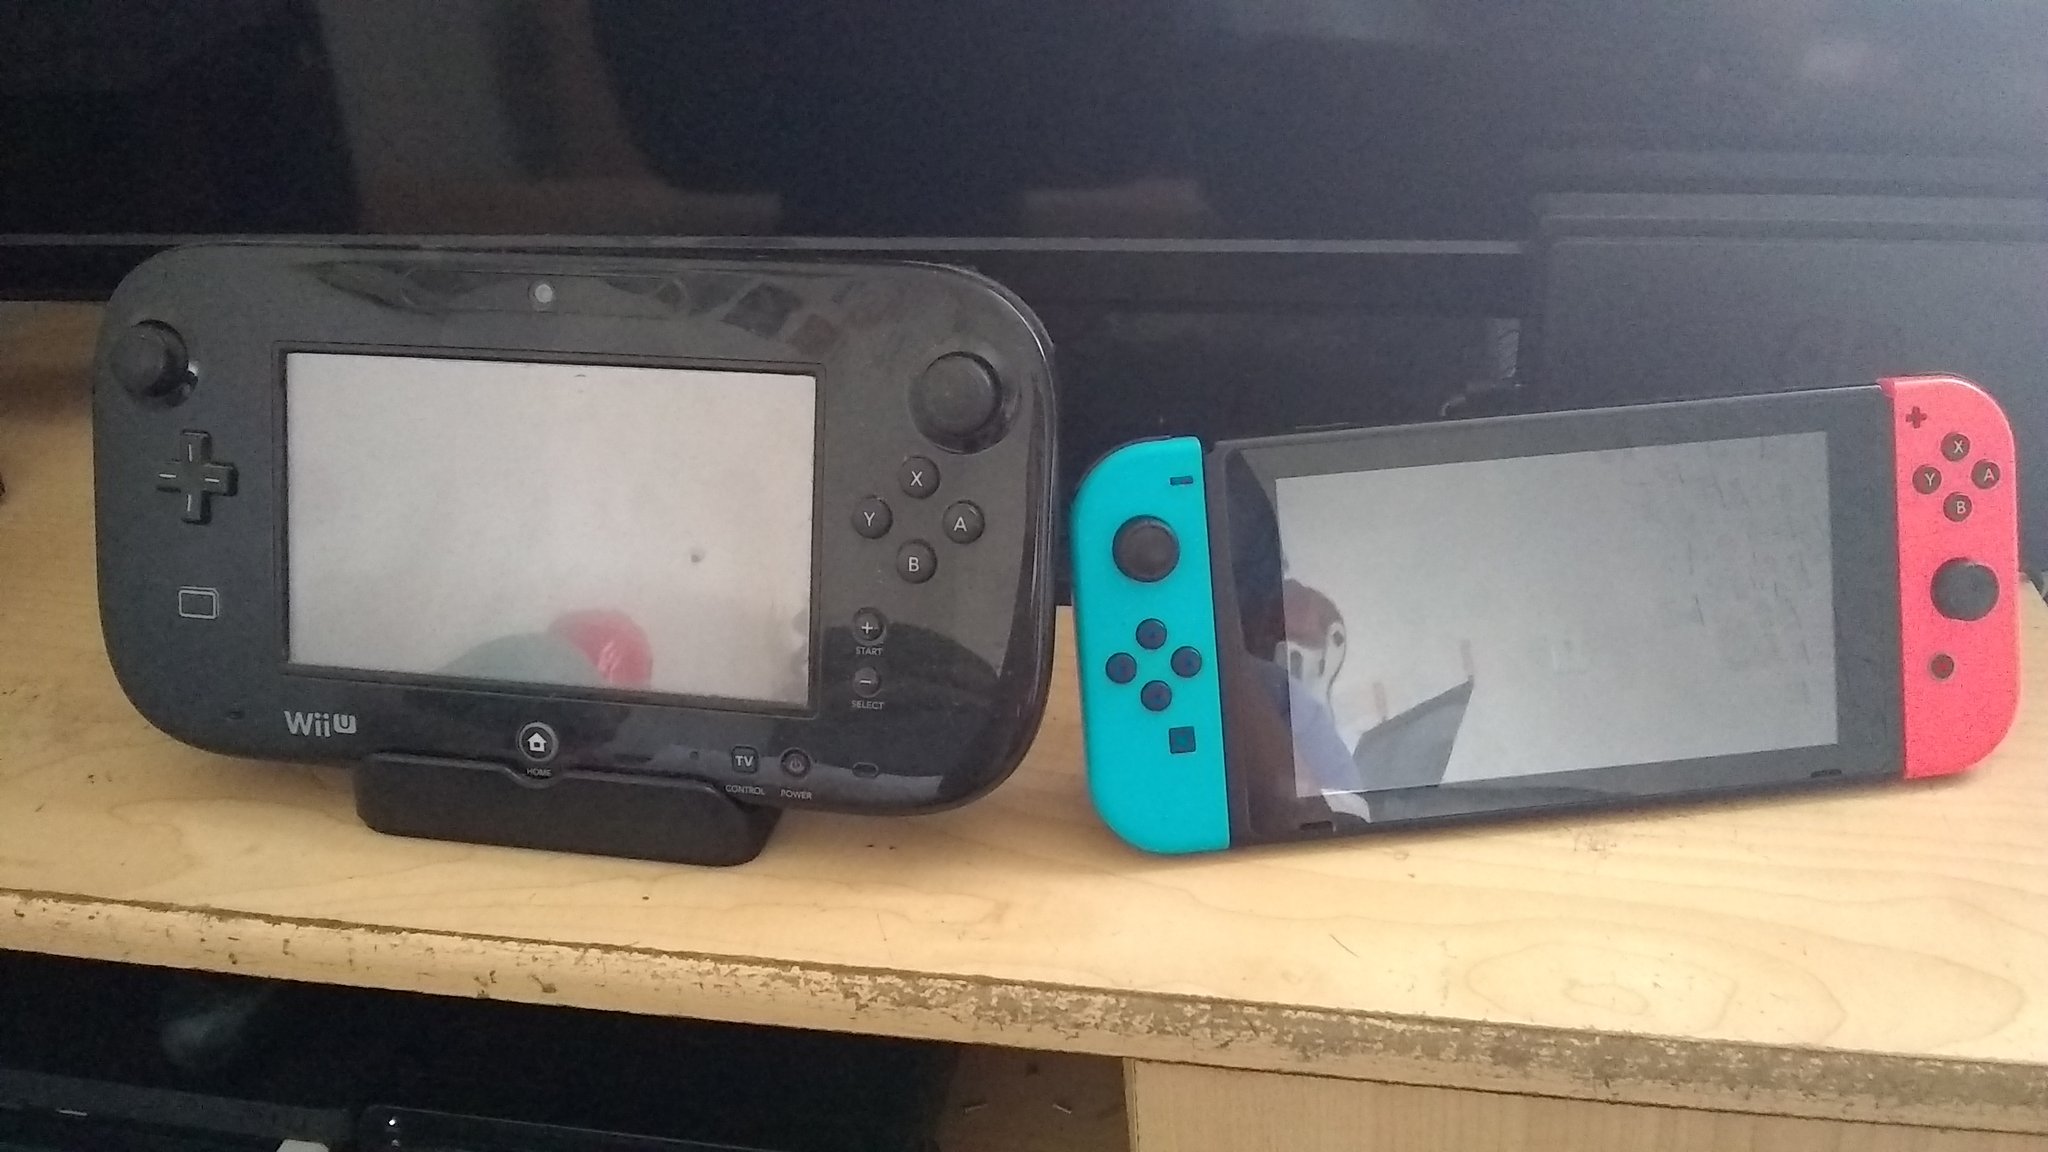 I love my Wii U so much! It will always be my main to go to